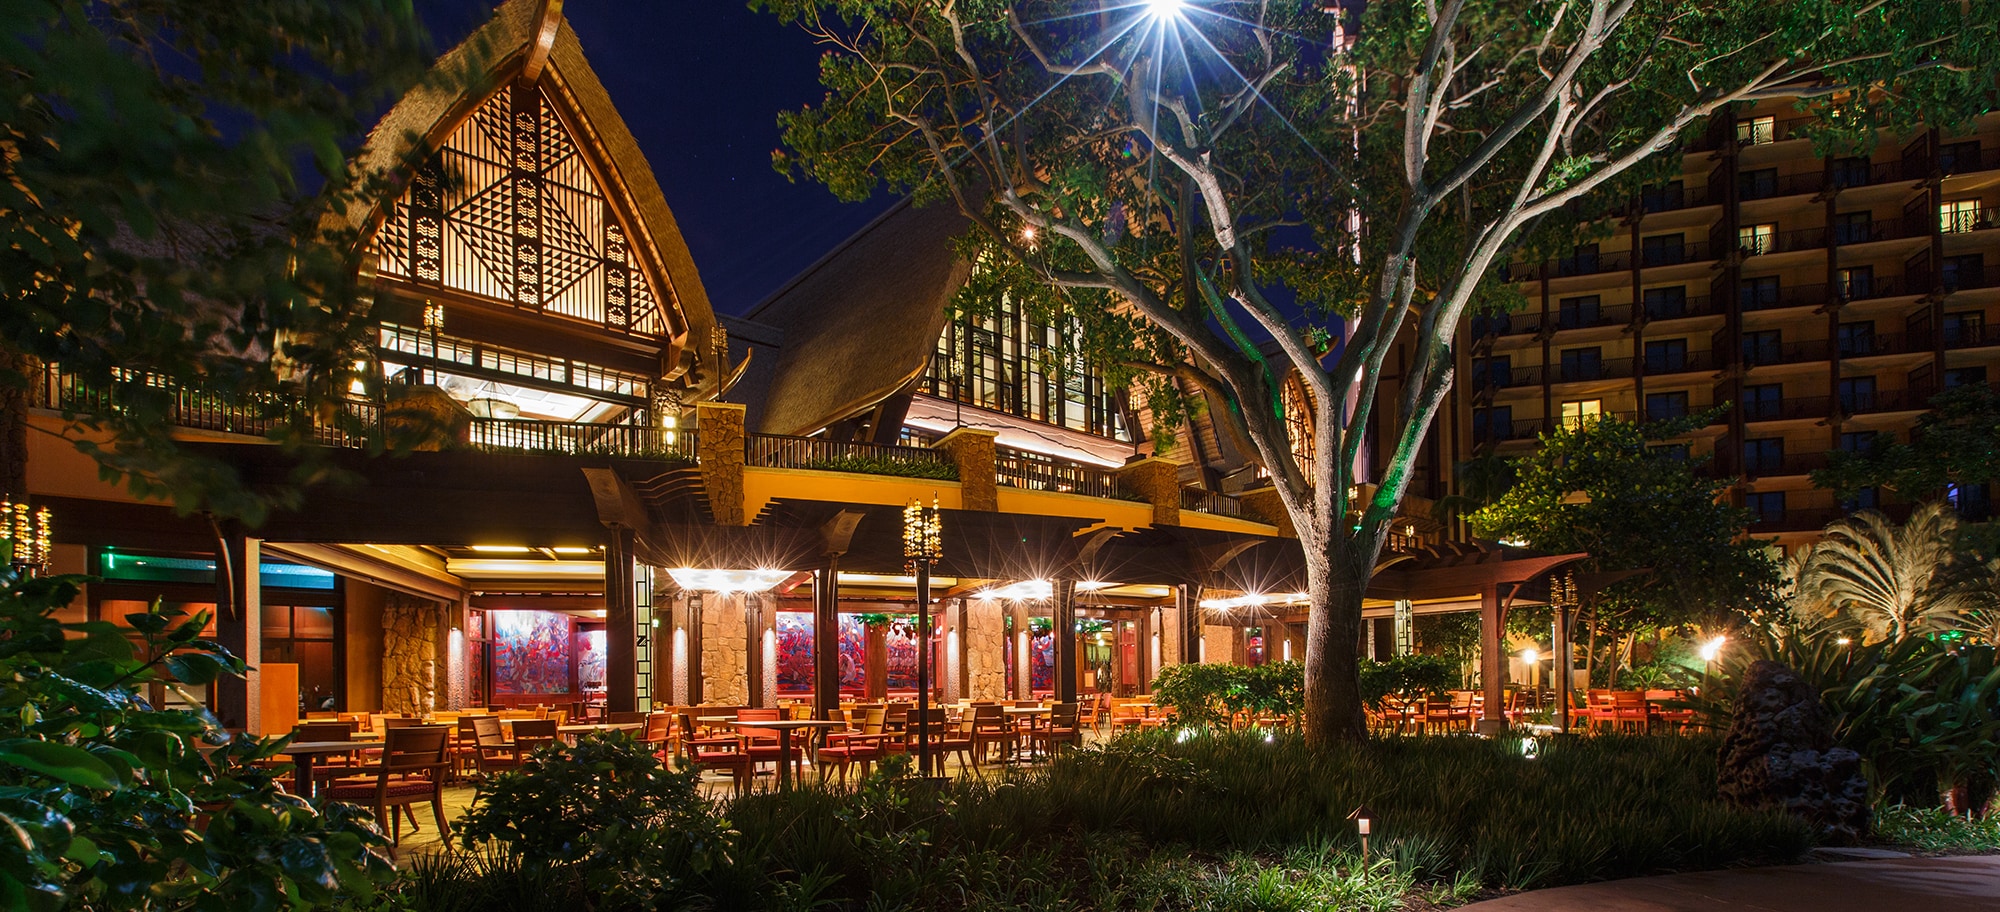 The exterior of Makahiki at night, with a lit-up covered patio and twin peaked roofs with native designs